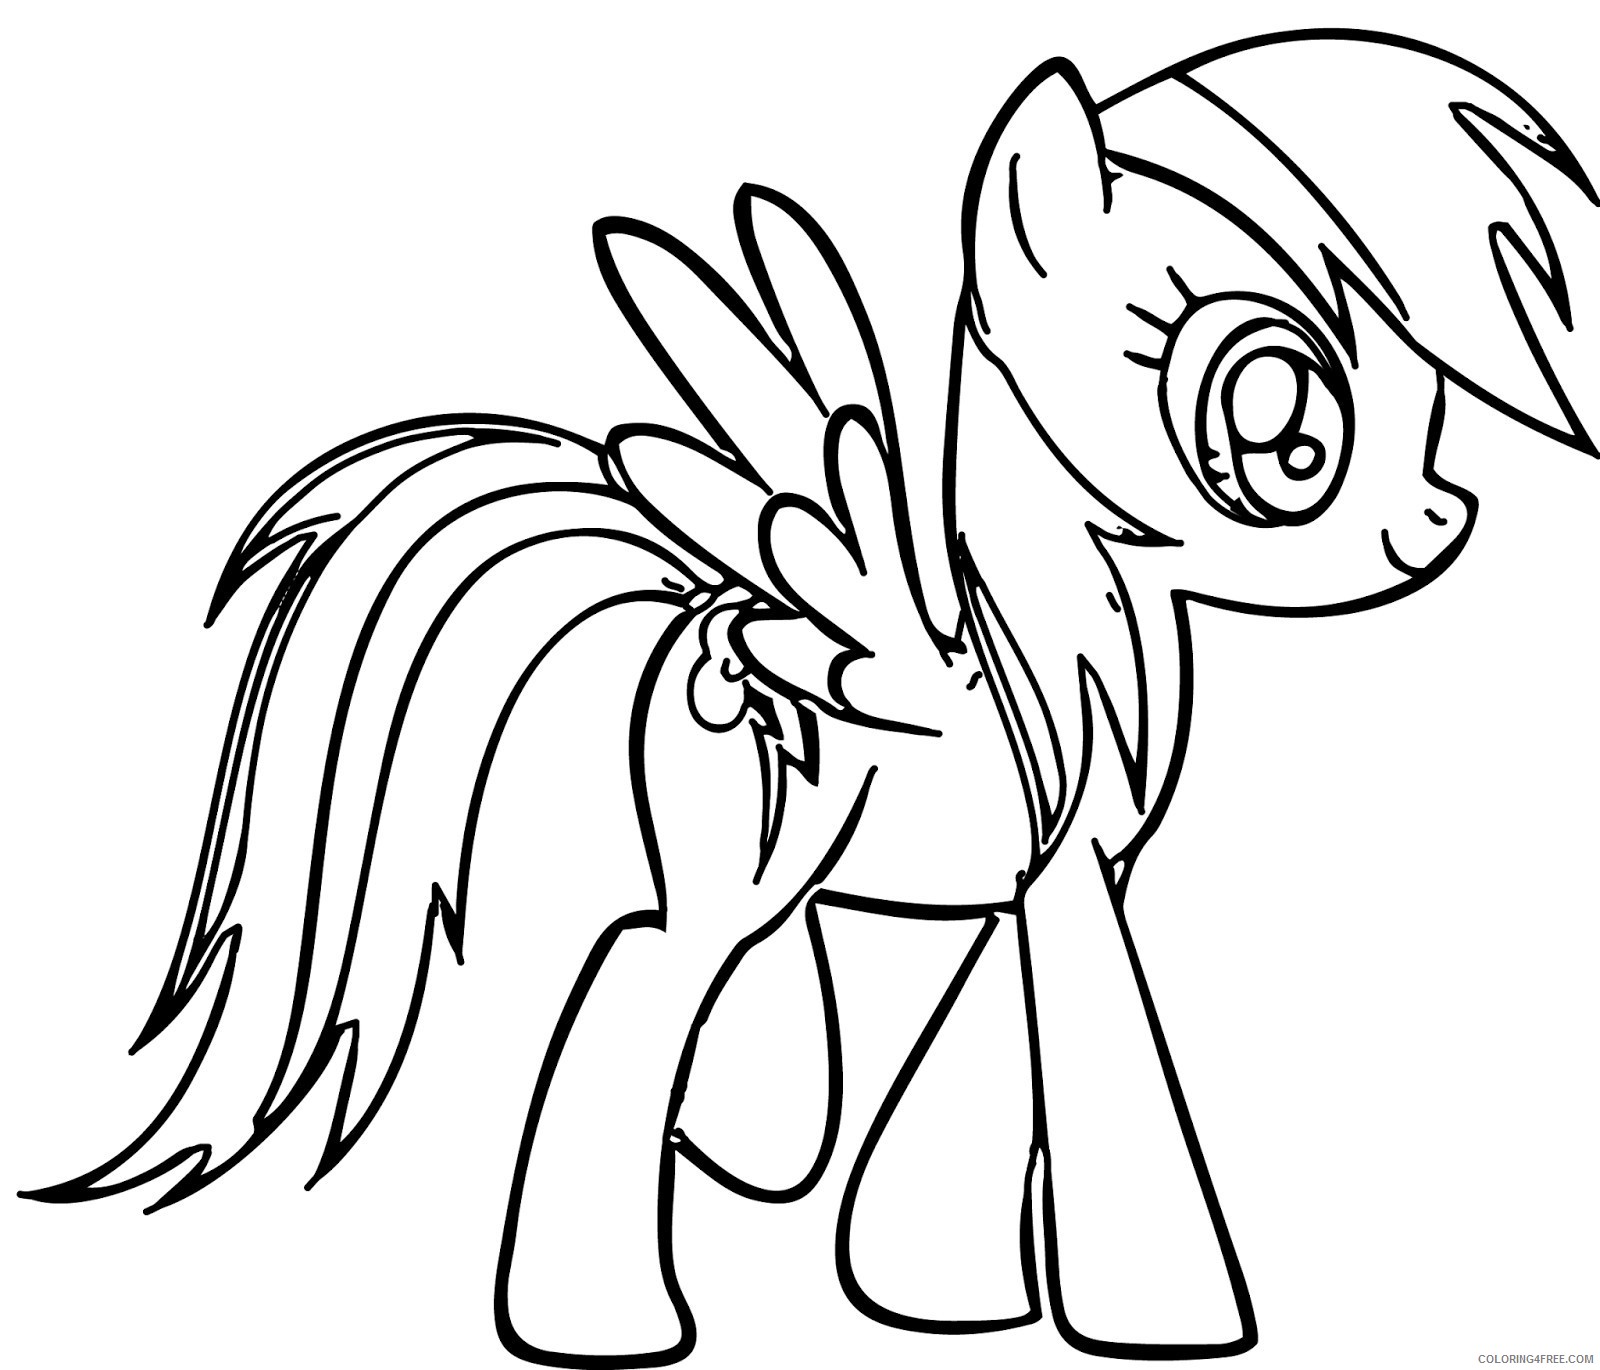 rainbow dash coloring pages for kids Coloring4free